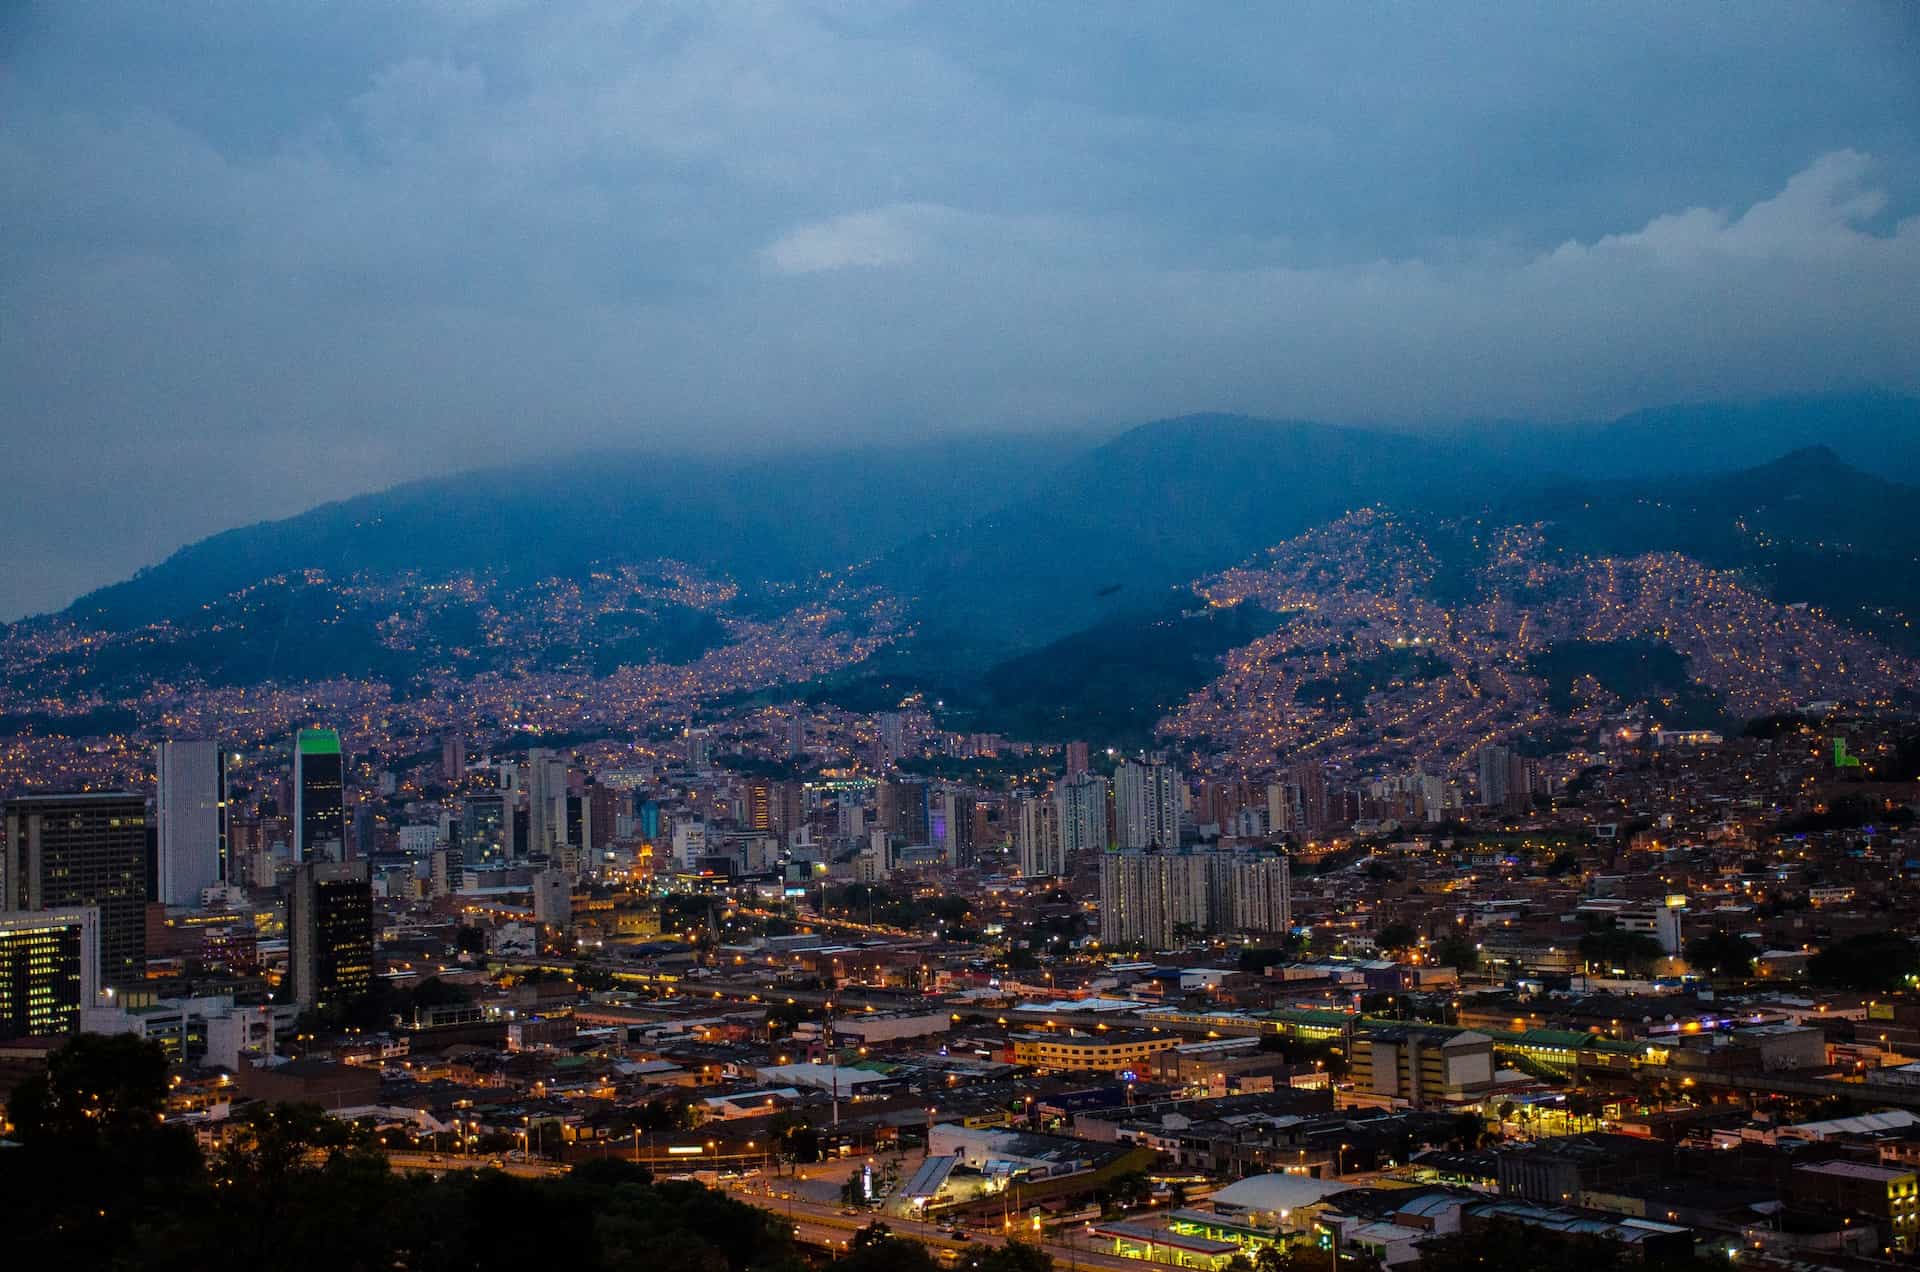 A mix of skyscrapers and smaller buildings in Medellín, by night.